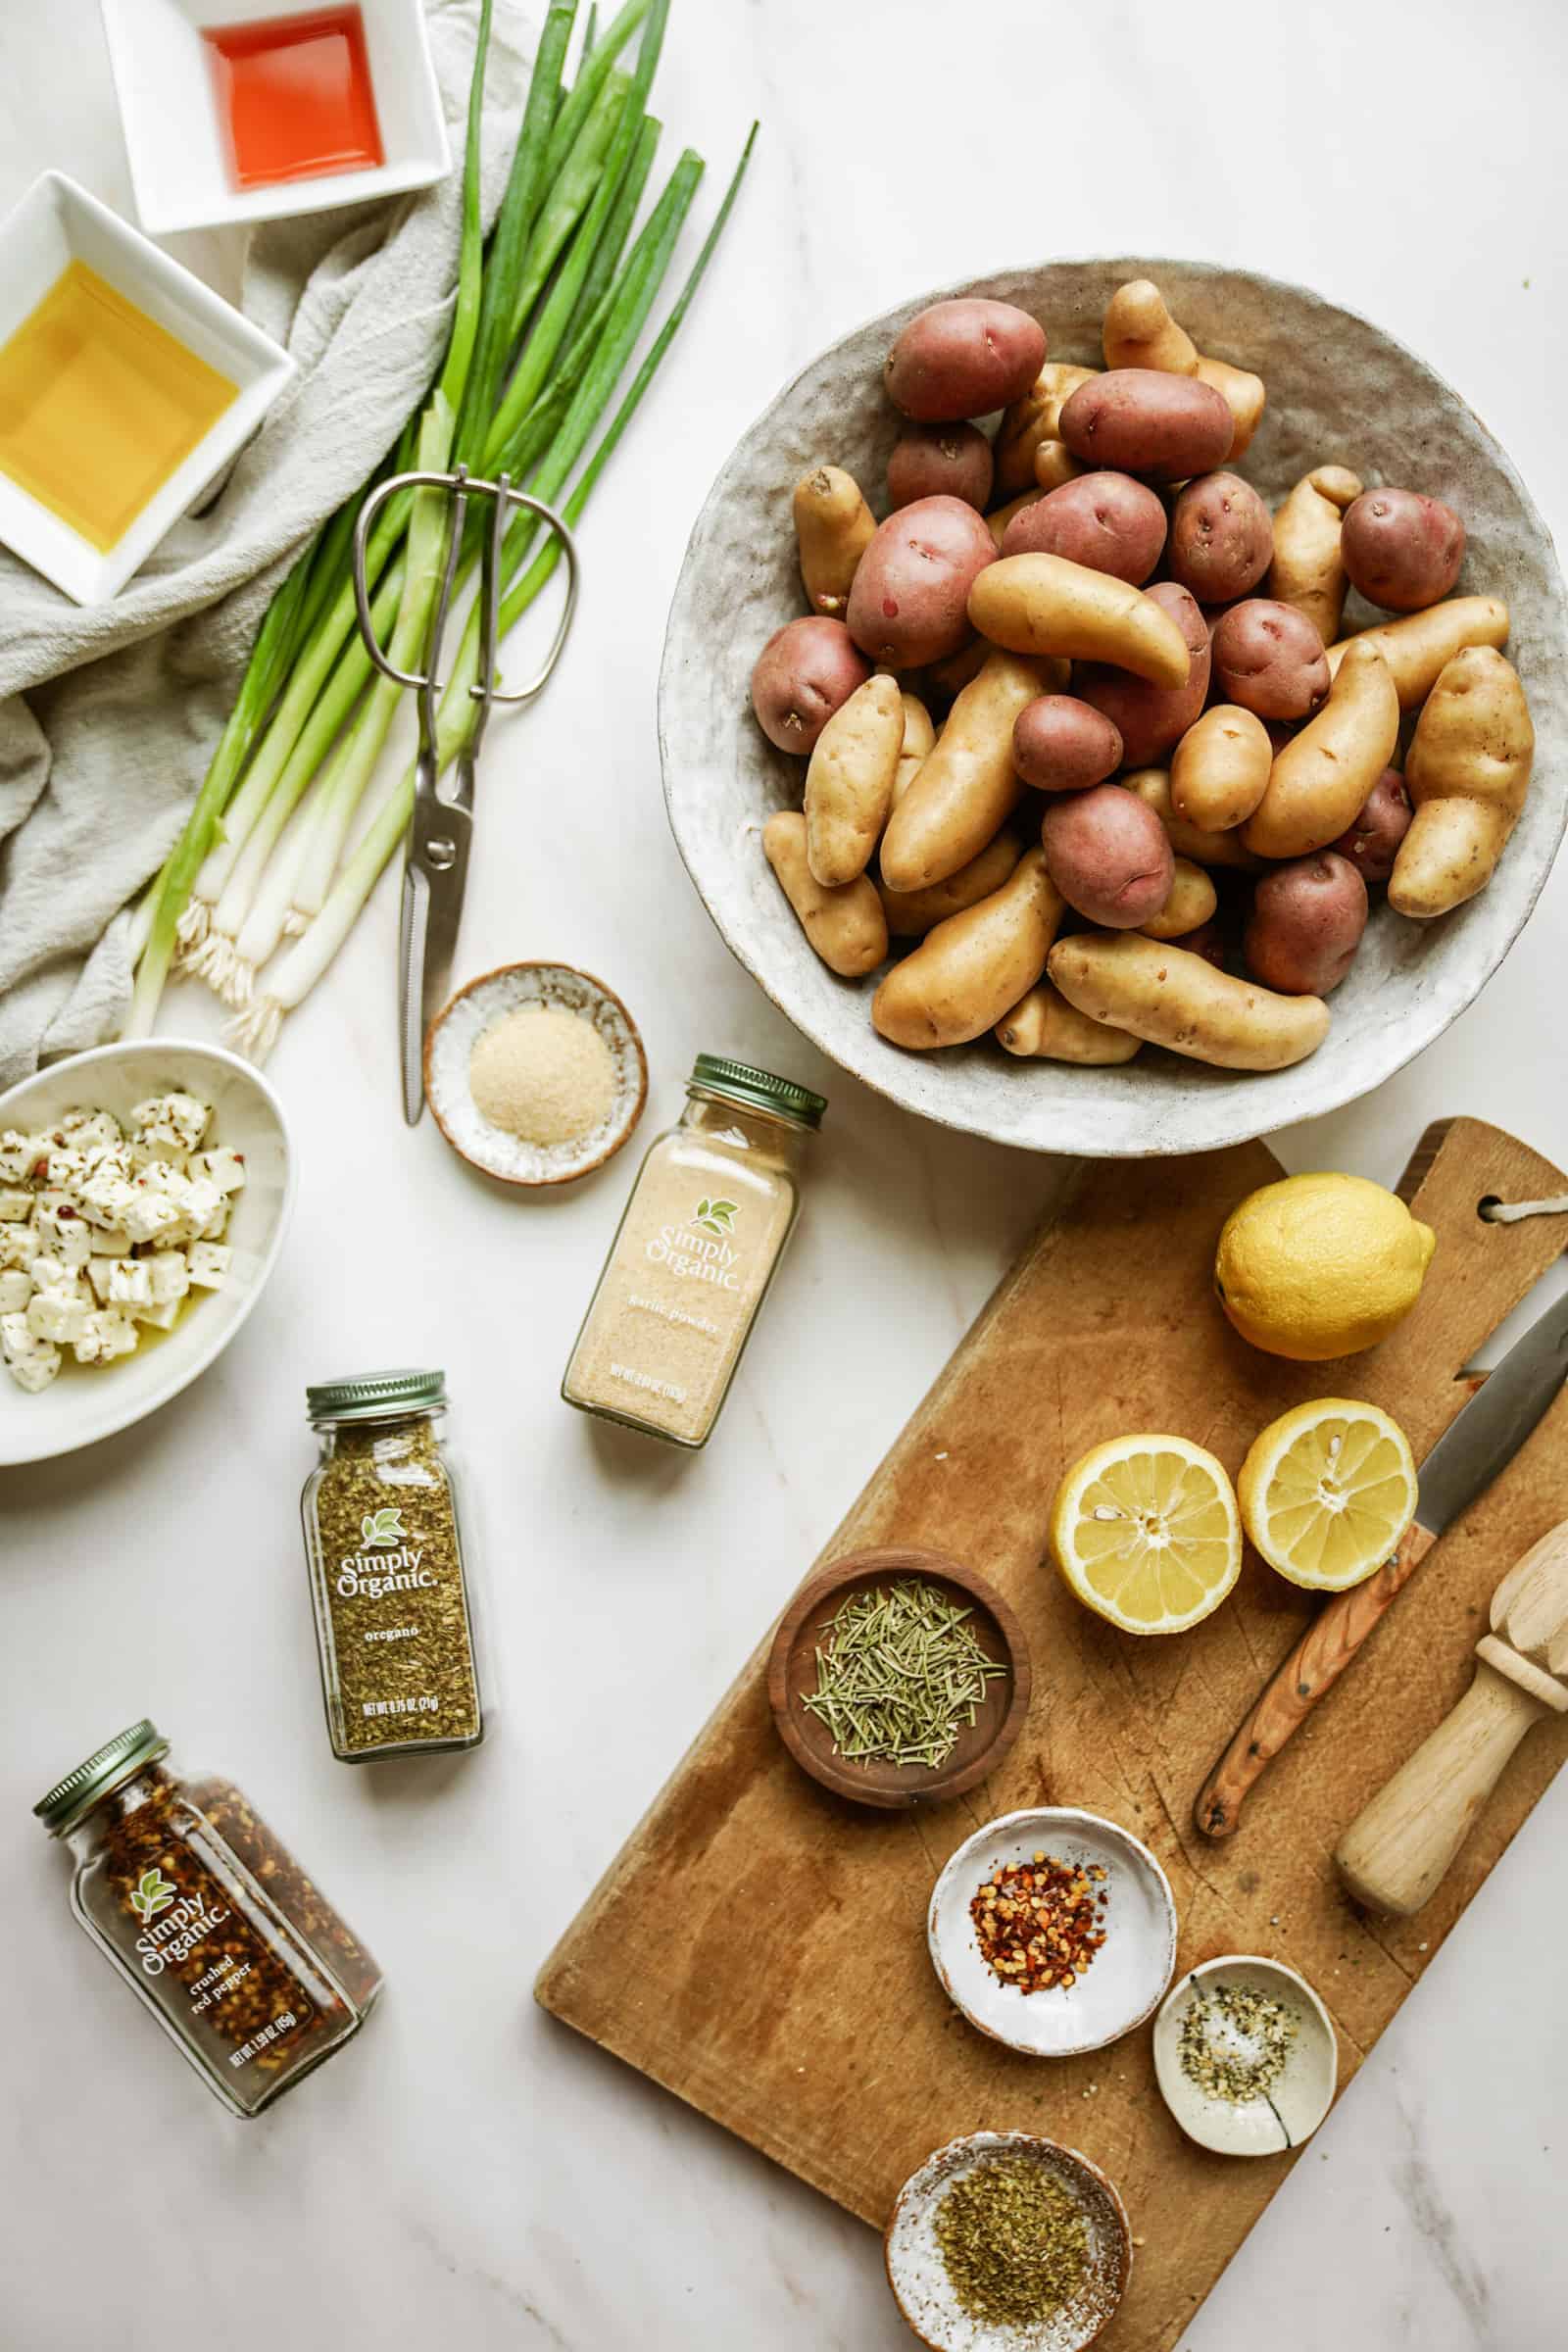 Ingredients on table and cutting board for Greek Potato Salad